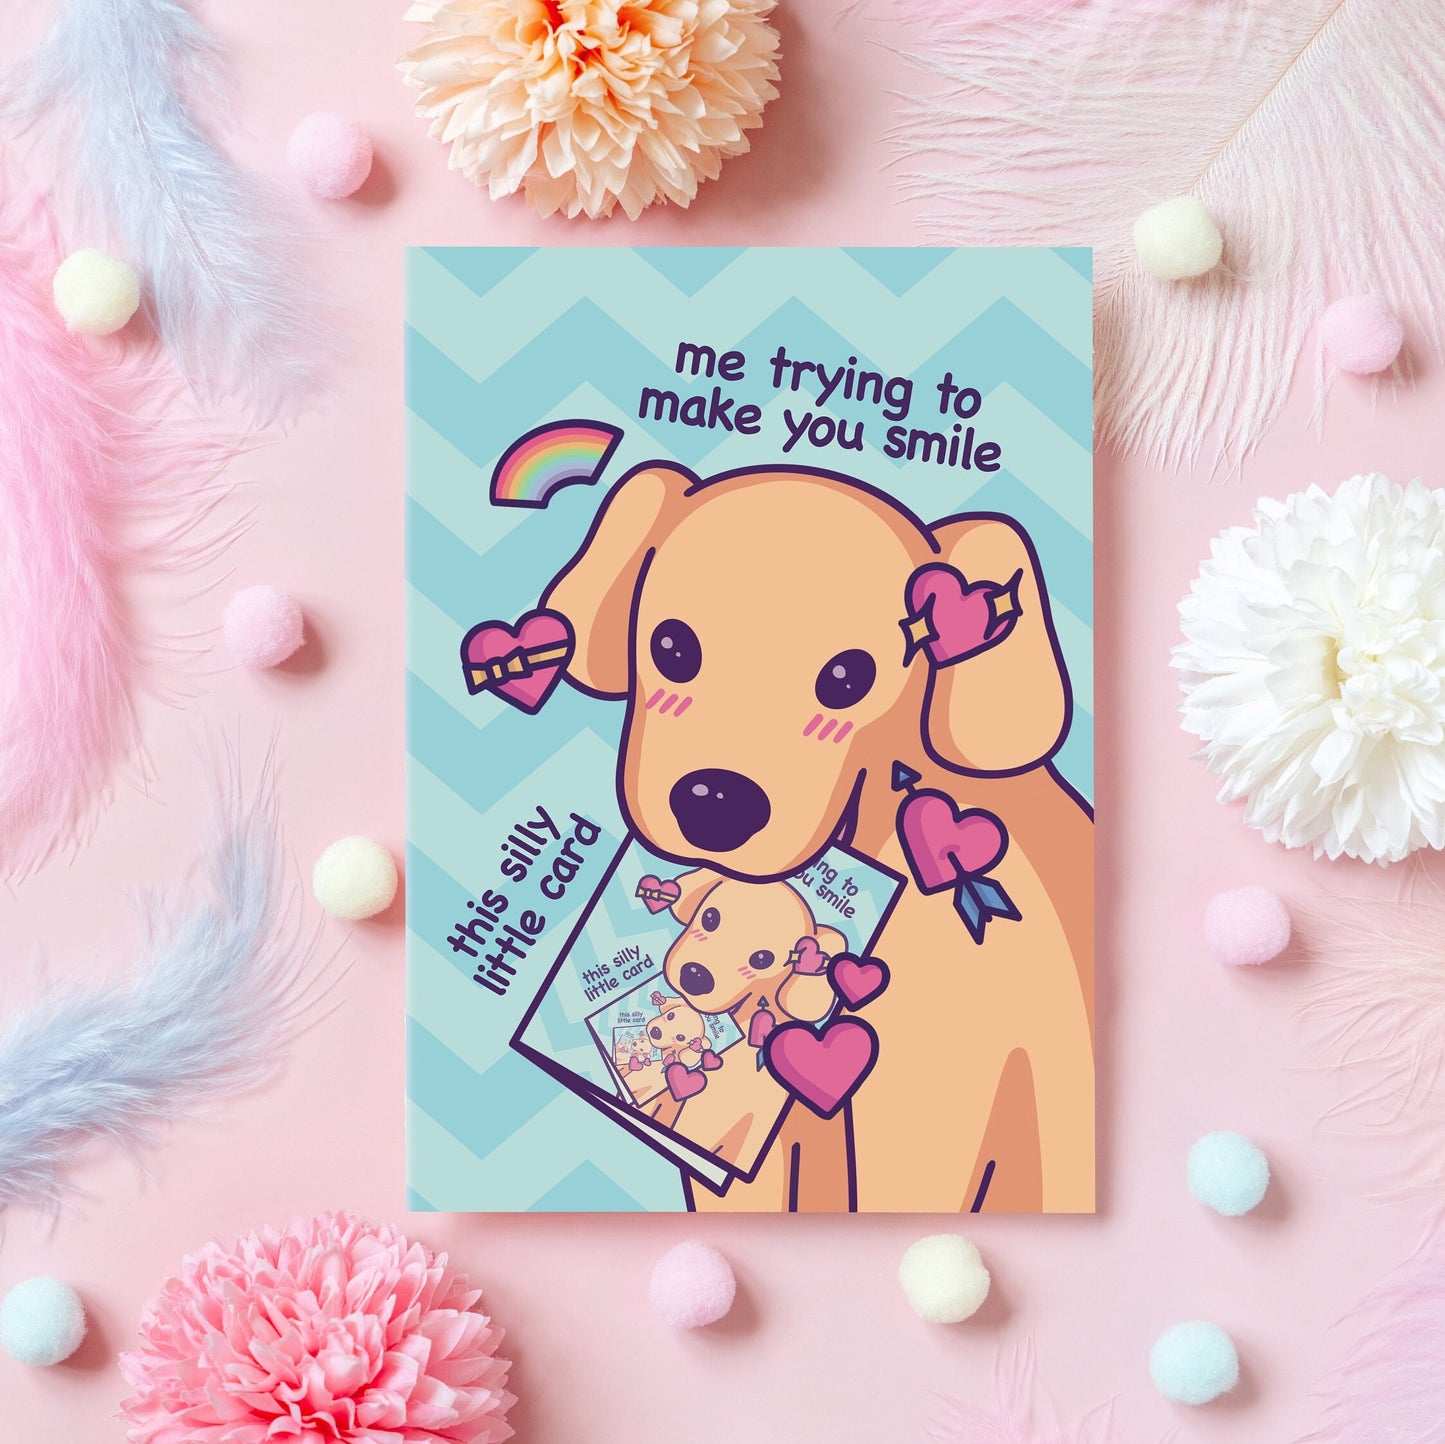 Funny Dog Love Card | Funny Anniversary, Birthday or Just Because Card | Meme Gift For Boyfriend, Girlfriend, Best Friend - Her or Him